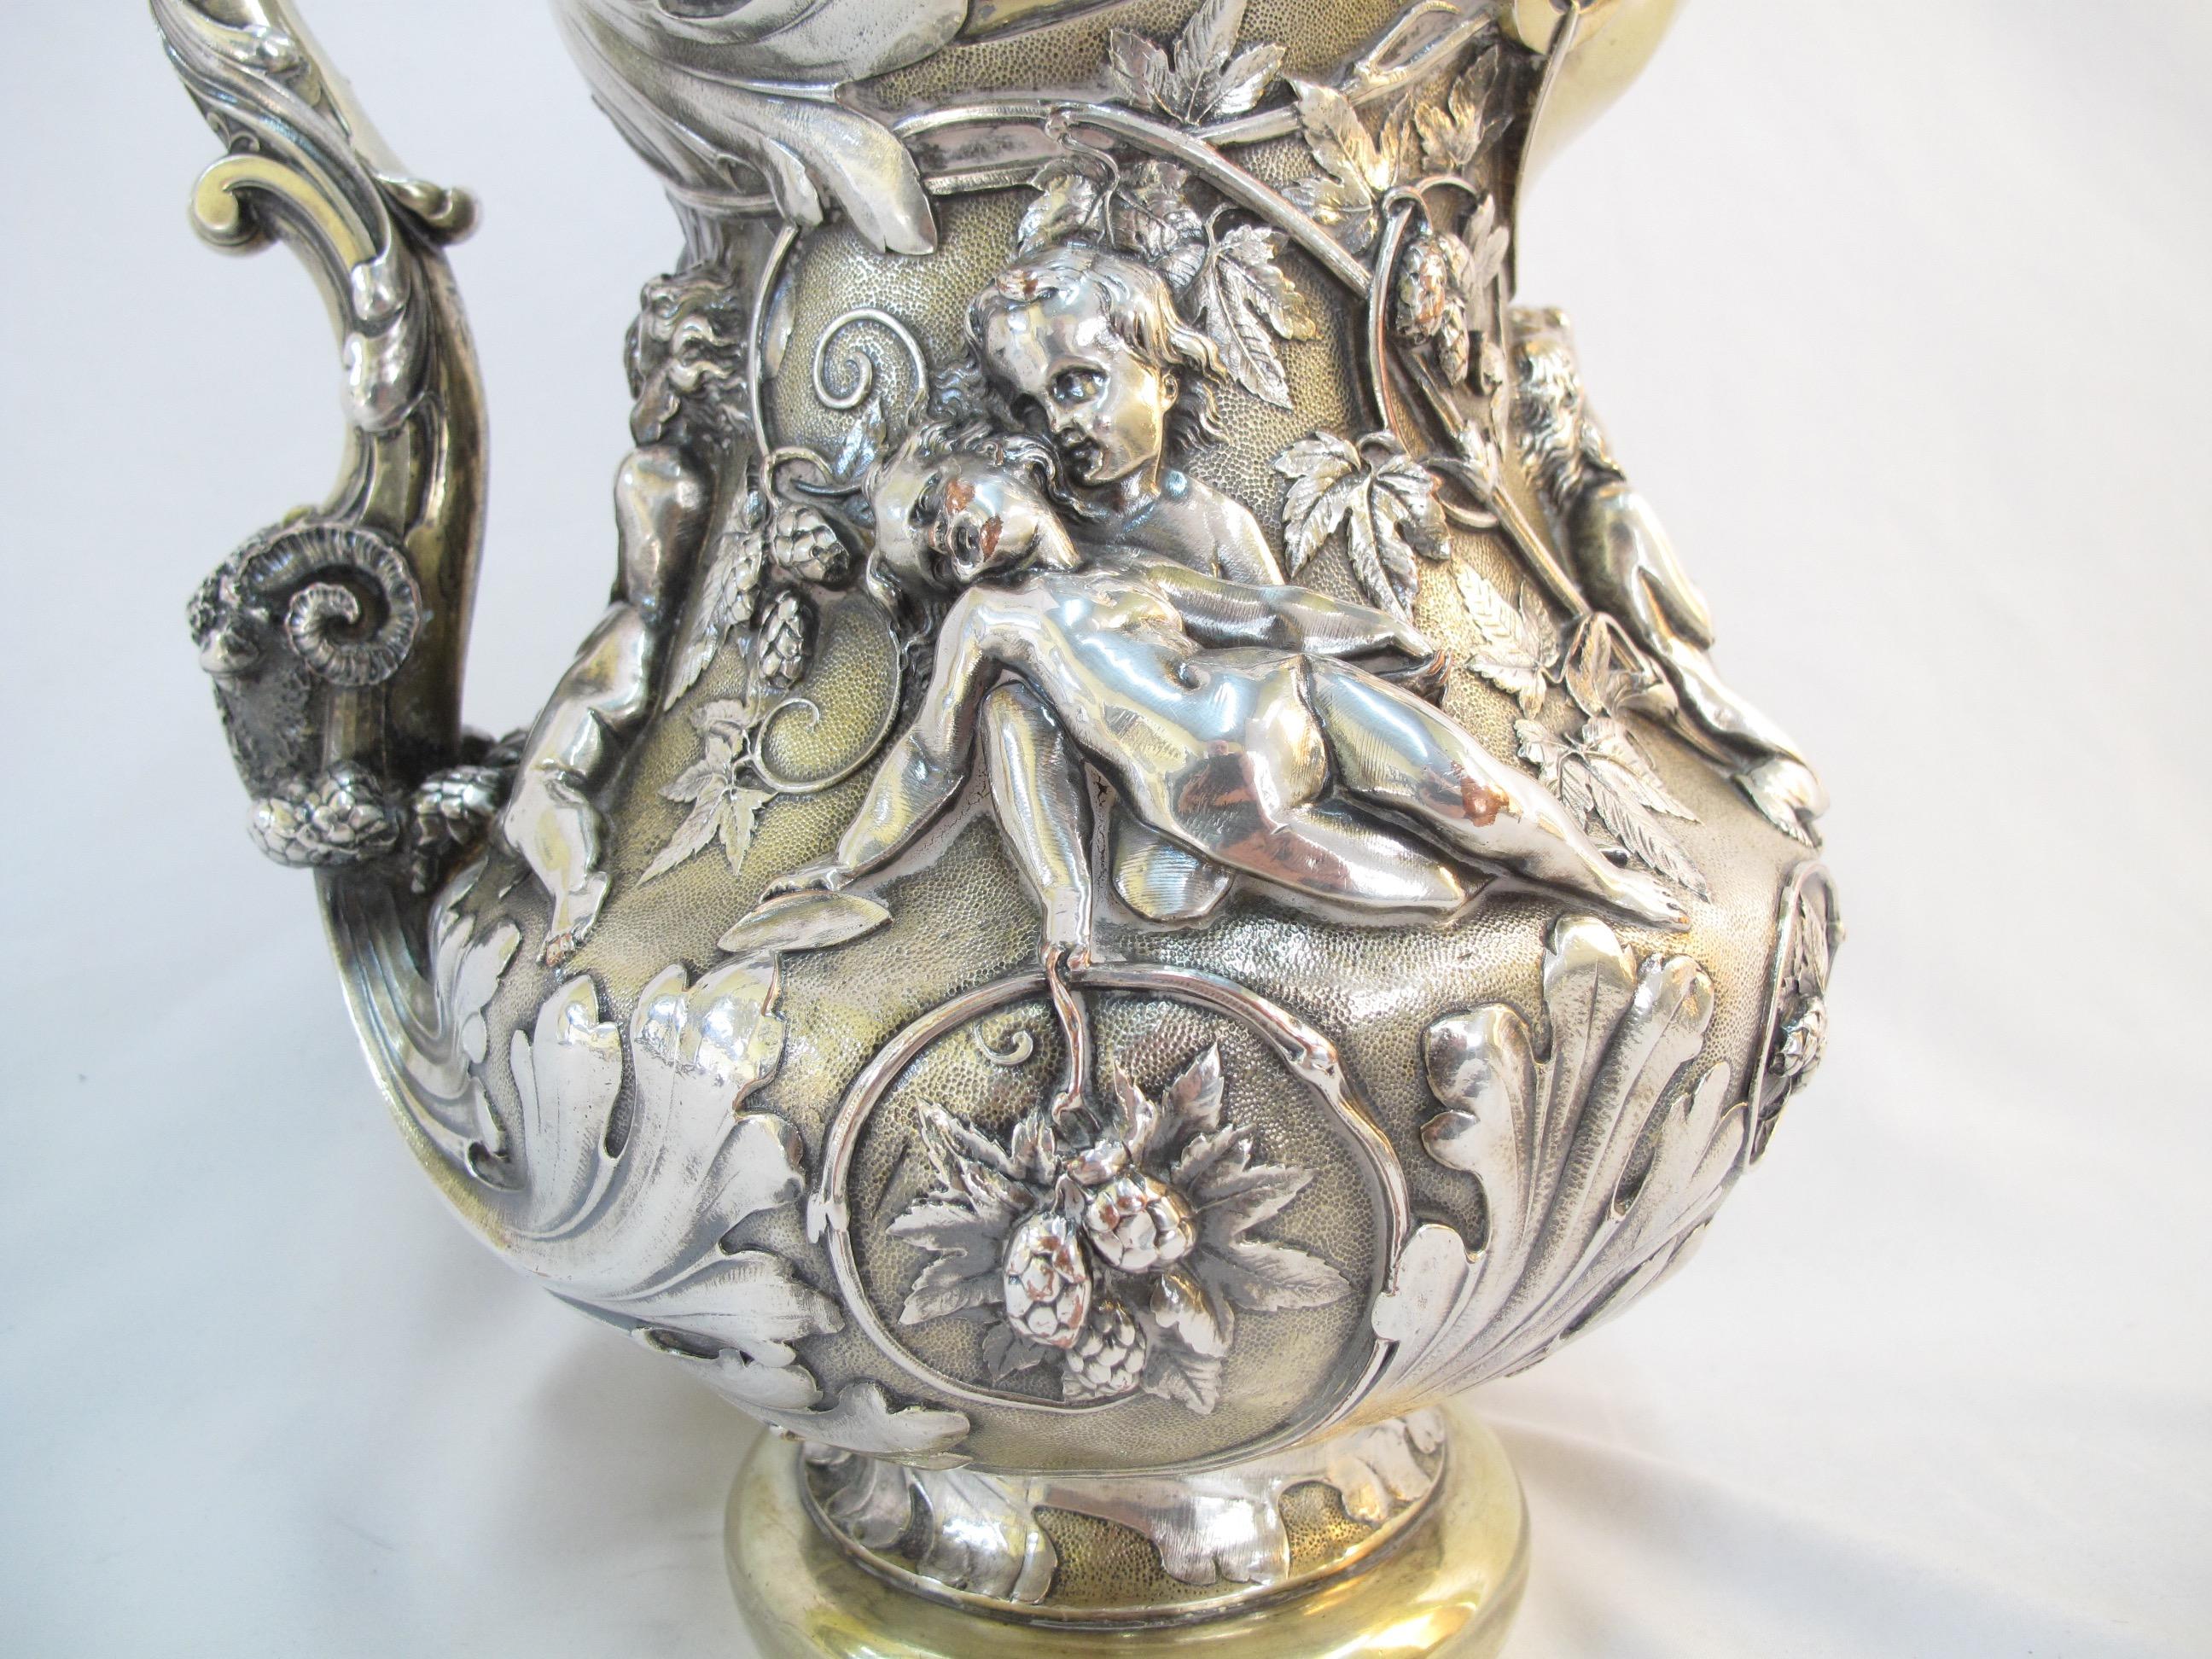 Large Ornate Putti Cavorting Among Hops Repousse Pitcher Elkington 19th Century For Sale 1